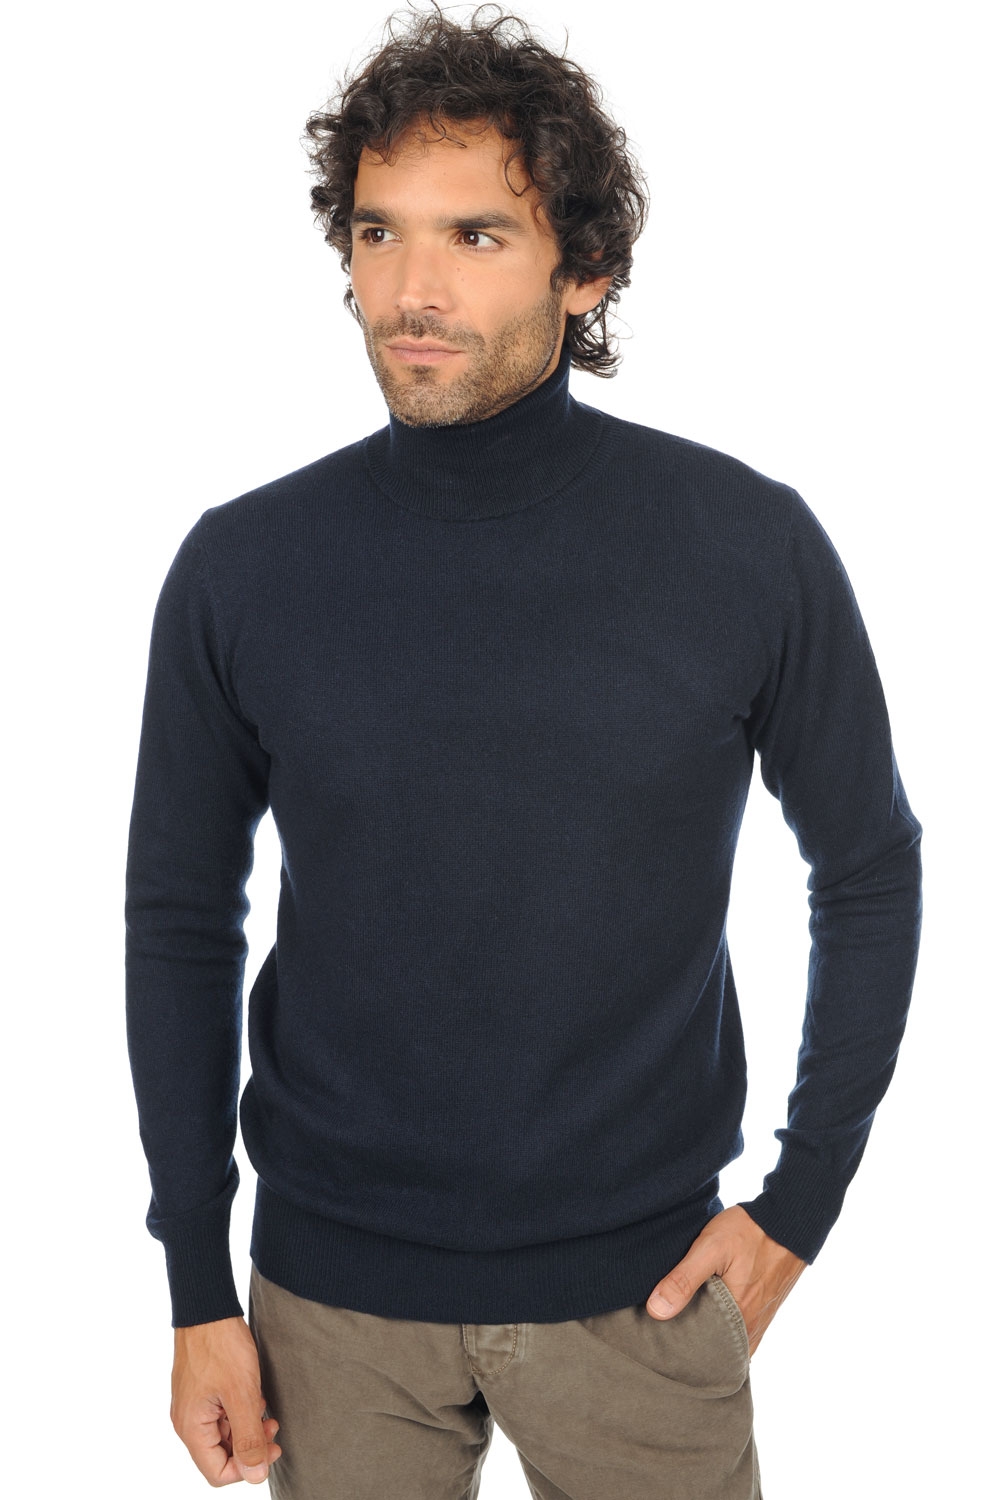 Cachemire pull homme col roule tarry first marine fonce xl